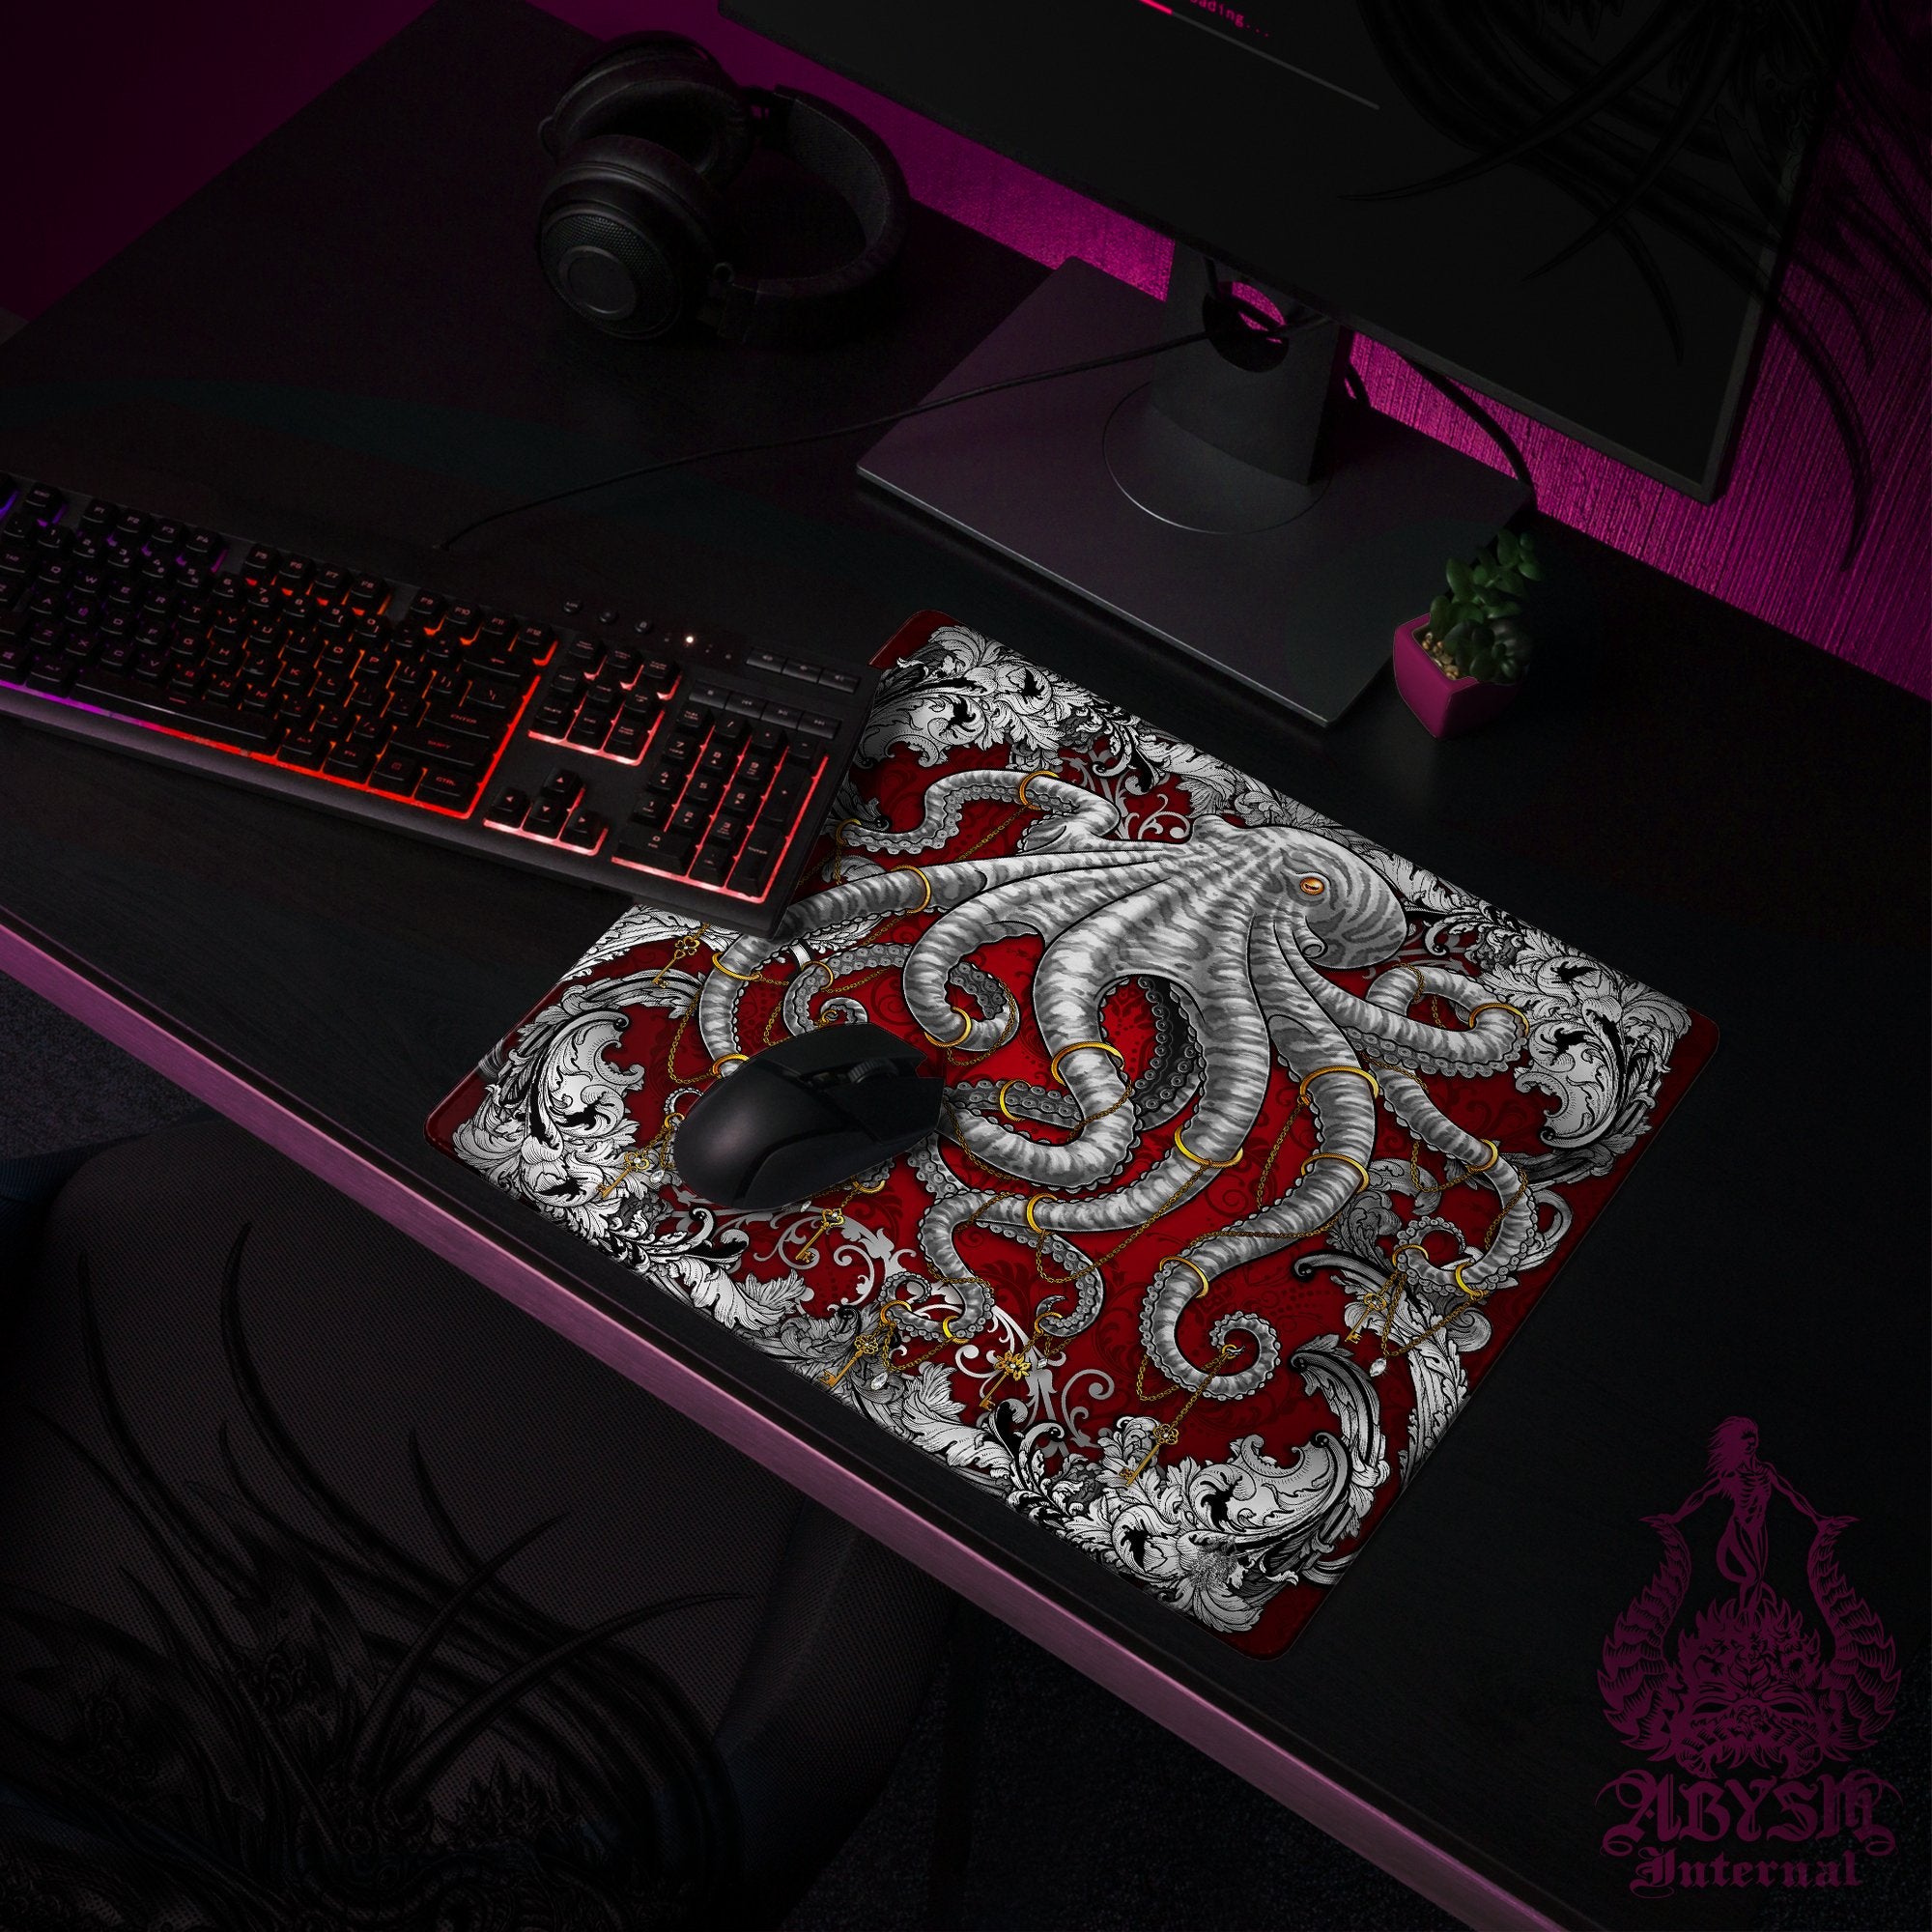 Silver Octopus Gaming Mouse Pad, Tentacles Desk Mat, Gamer Table Protector Cover, Colorful Workpad, Fantasy Art Print - 2 Colors - Abysm Internal